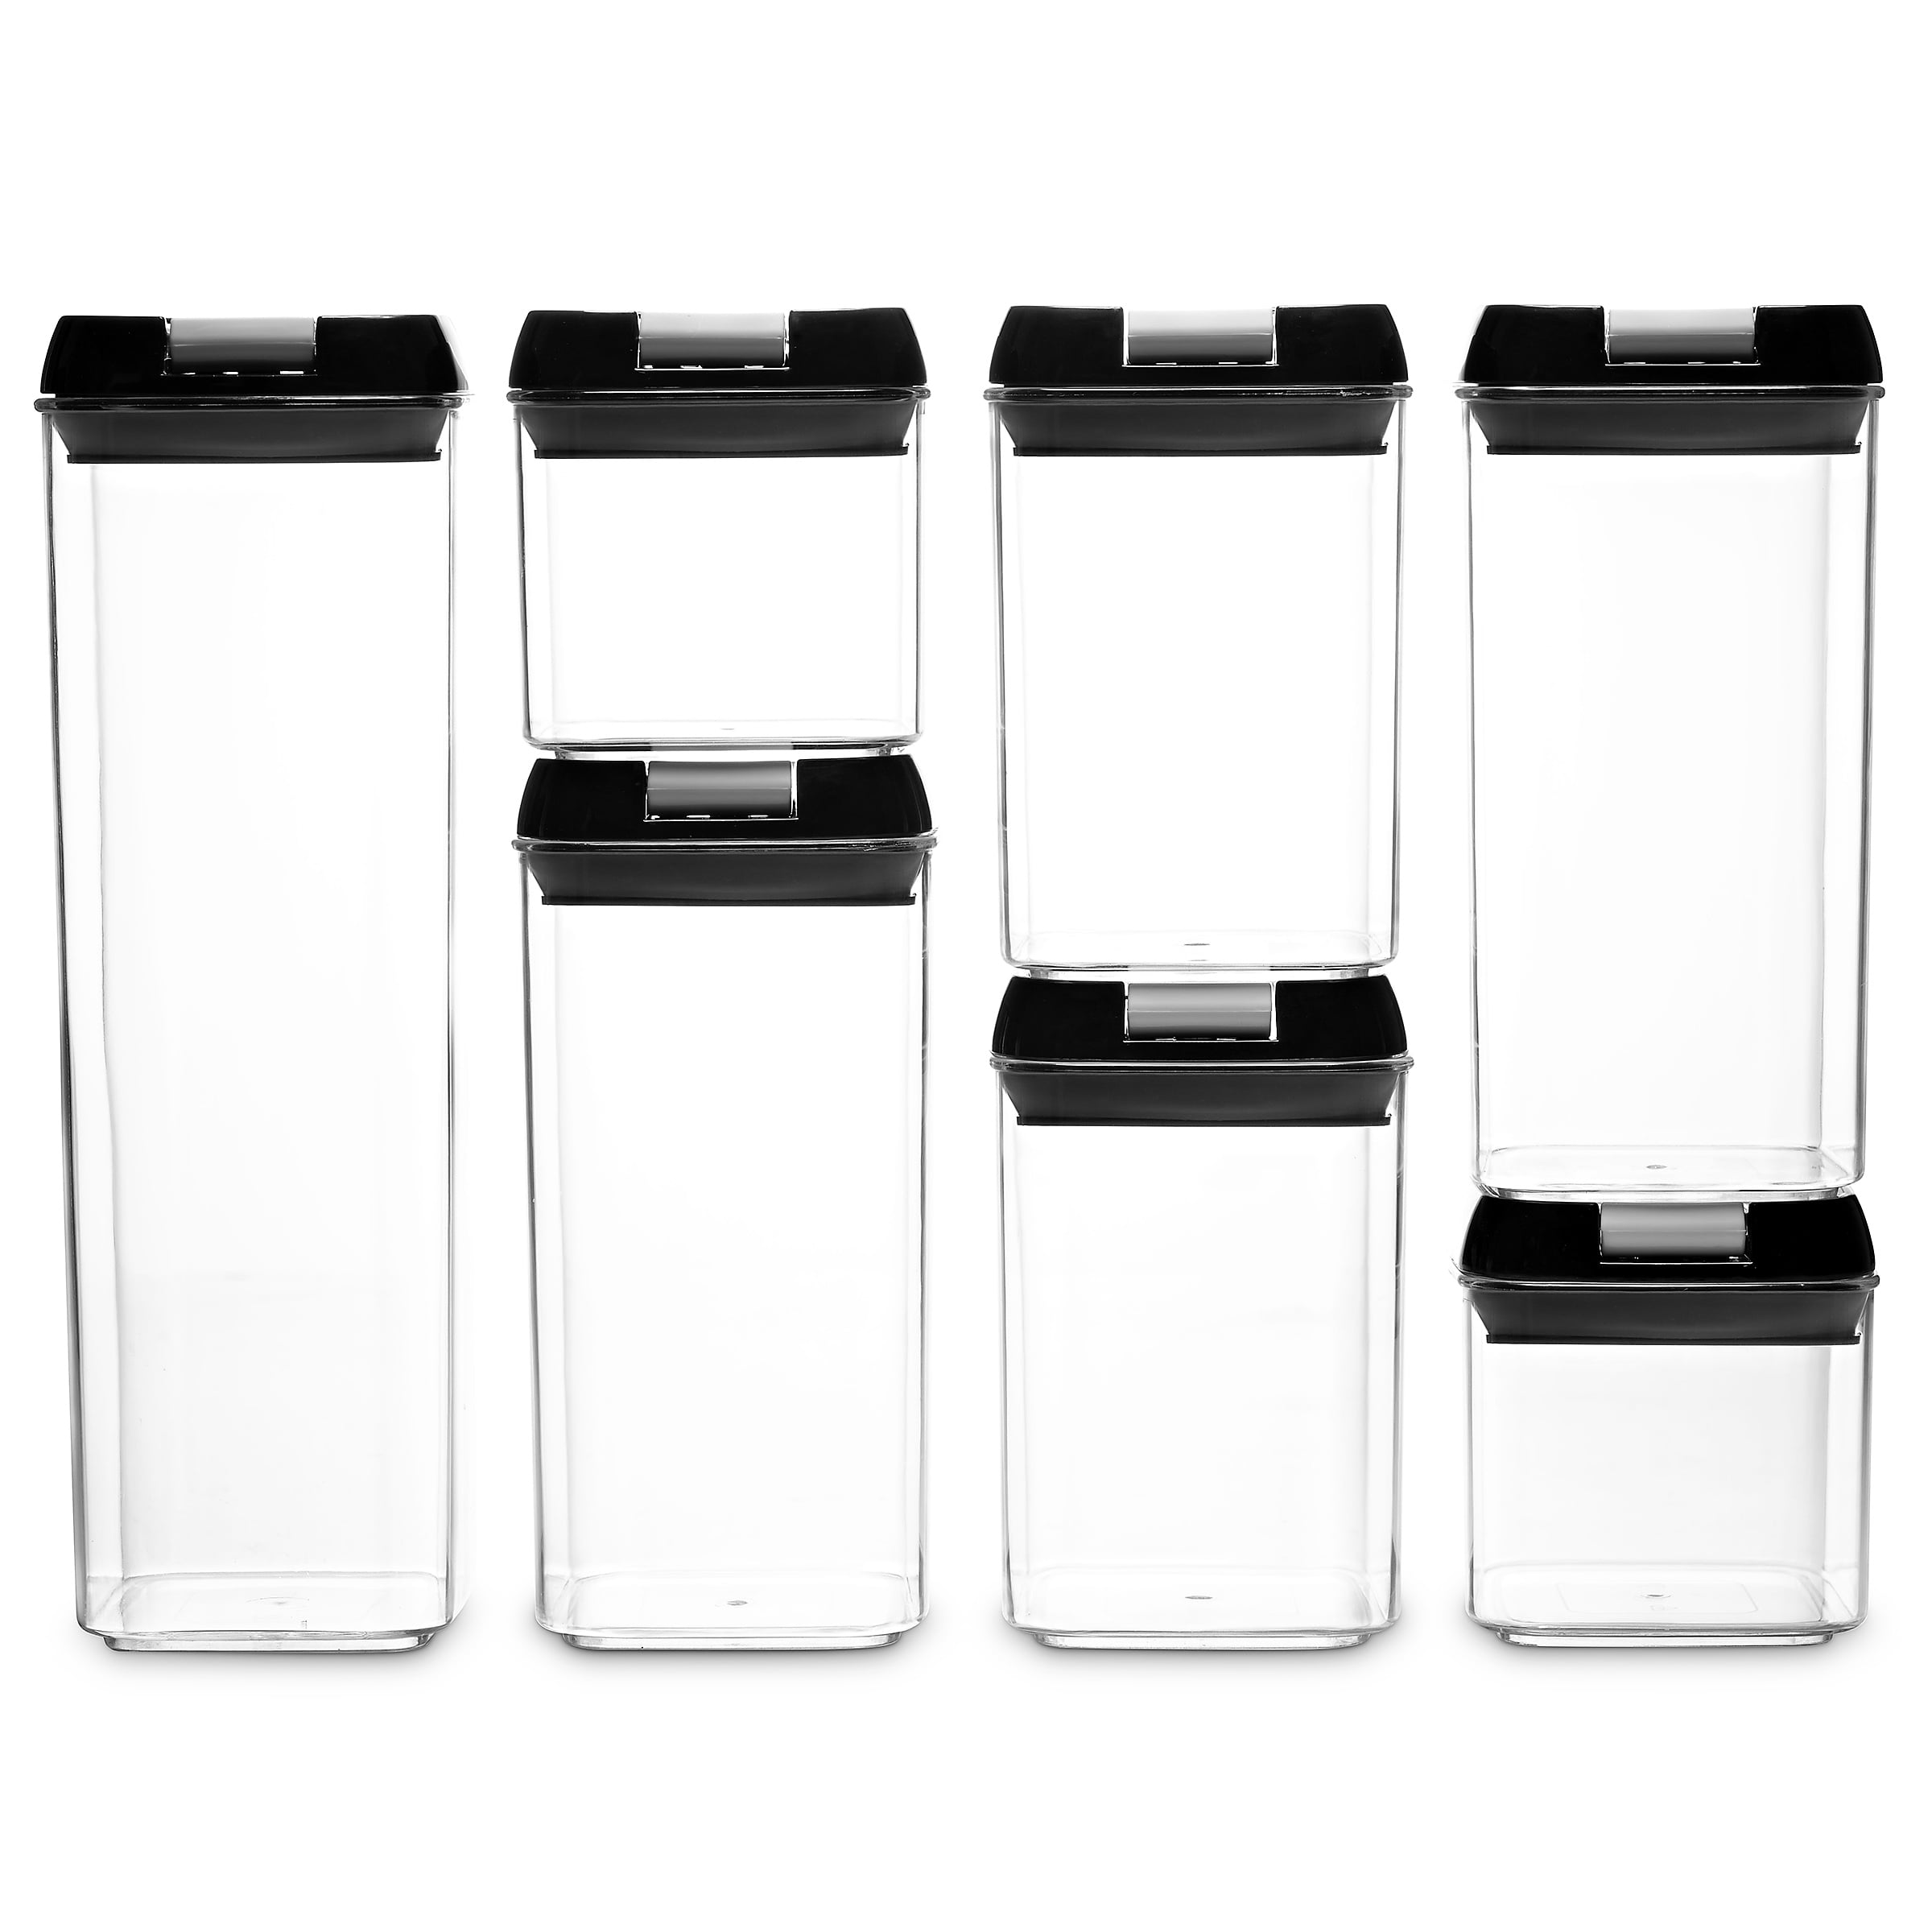 CHEER COLLECTION 7-piece Plastic Stackable Airtight Food Storage Container  Set - Black CC-7PCFSTRCNR-BLK - The Home Depot